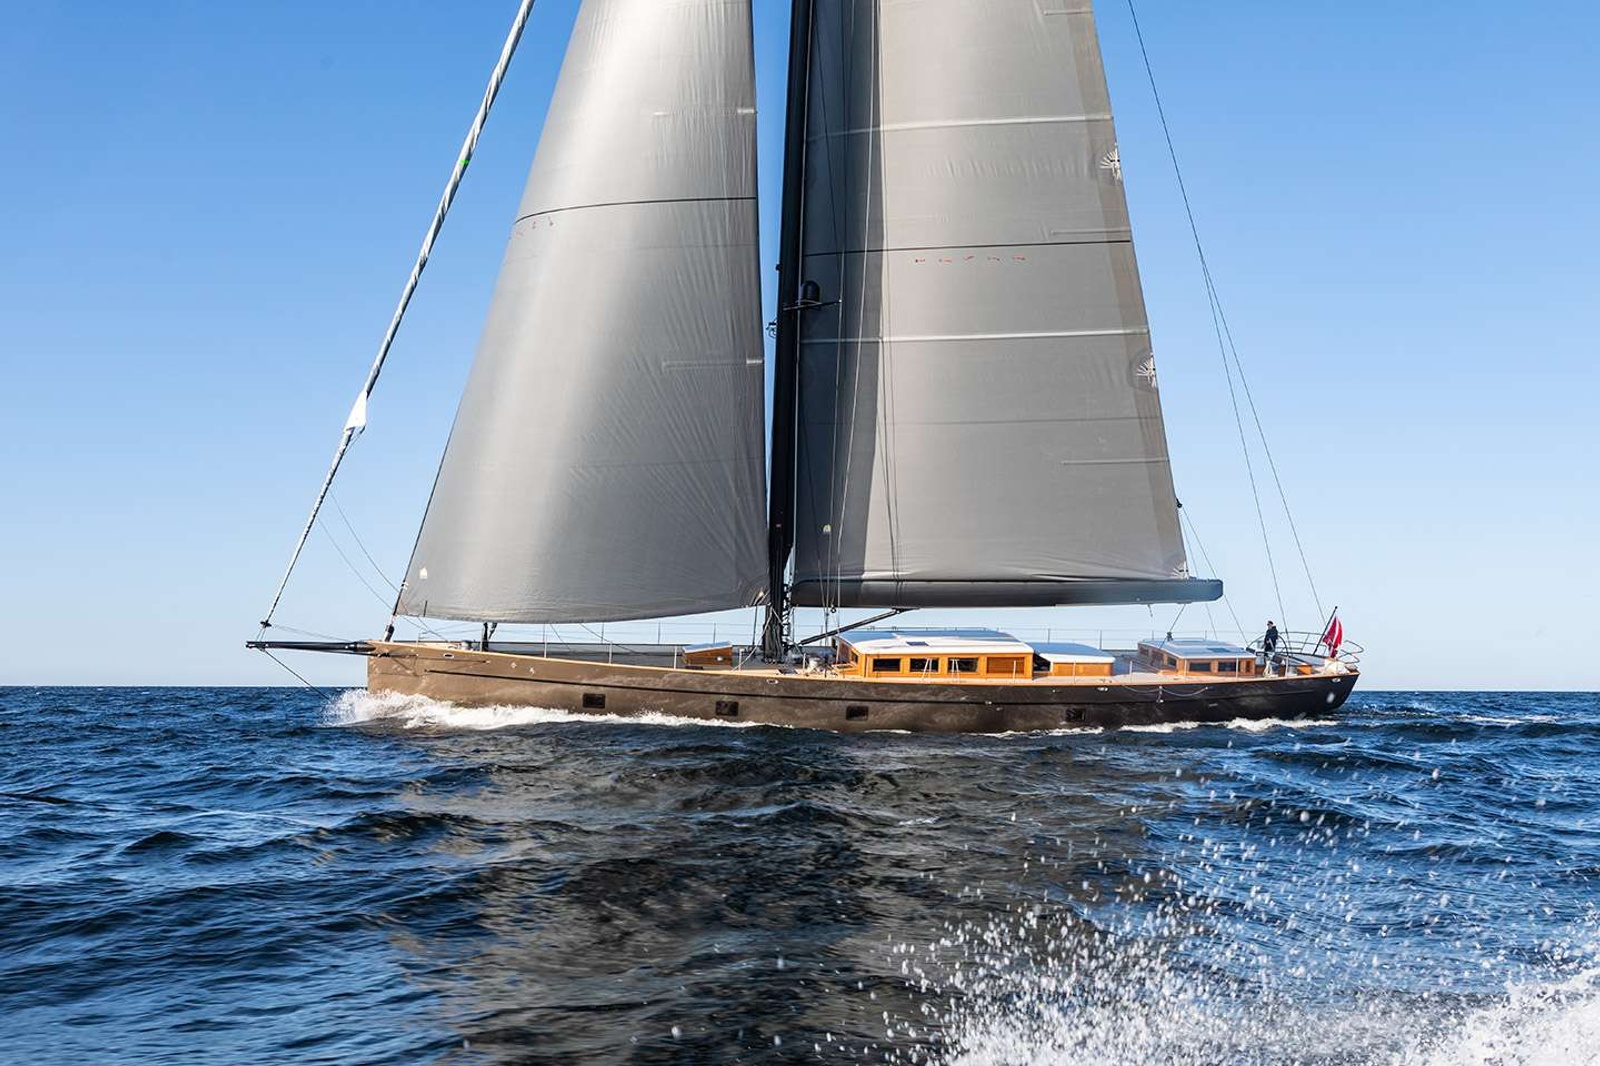 Boat International's Sailing Yacht of the Year for 2022! Built by Baltic Yachts, and delivered in 2021, this modern classic was designed by Dykstra Naval Architects. PERSEVERANCE offers exceptional sailing performance with an emphasis on green technology including smart cabins, an electric propulsion system, and the ability to regenerate electricity while underway. 

The stunning light and contemporary interior by deVosdeVries design features stained oak, dark maple flooring, and ‘industrial chic hardware’. PERSEVERANCE can accommodate up to 8 guests in 4 luxurious ensuite cabins. The spacious full beam master stateroom is located forward, with an entry foyer, king size bed, large bathroom with shower and an abundance of natural light. Amidships you will find the VIP double cabin with queen-sized bed, twin cabin, and comfortable bunk bed cabin. 

KEY FEATURES
Craftsmanship, performance, and aesthetics of a Baltic yacht
Award winning blend of style and substance
Advanced carbon fibre construction & oversized rig
Double cockpit deck layout
Bimini top over guest cockpit that can be raised or lowered while sailing 
Sleeps up to eight guests in four spacious cabins
Side boarding platform for easy access to water 
Eco-friendly systems to conserve and generate energy
Crew of talented and experienced sailors